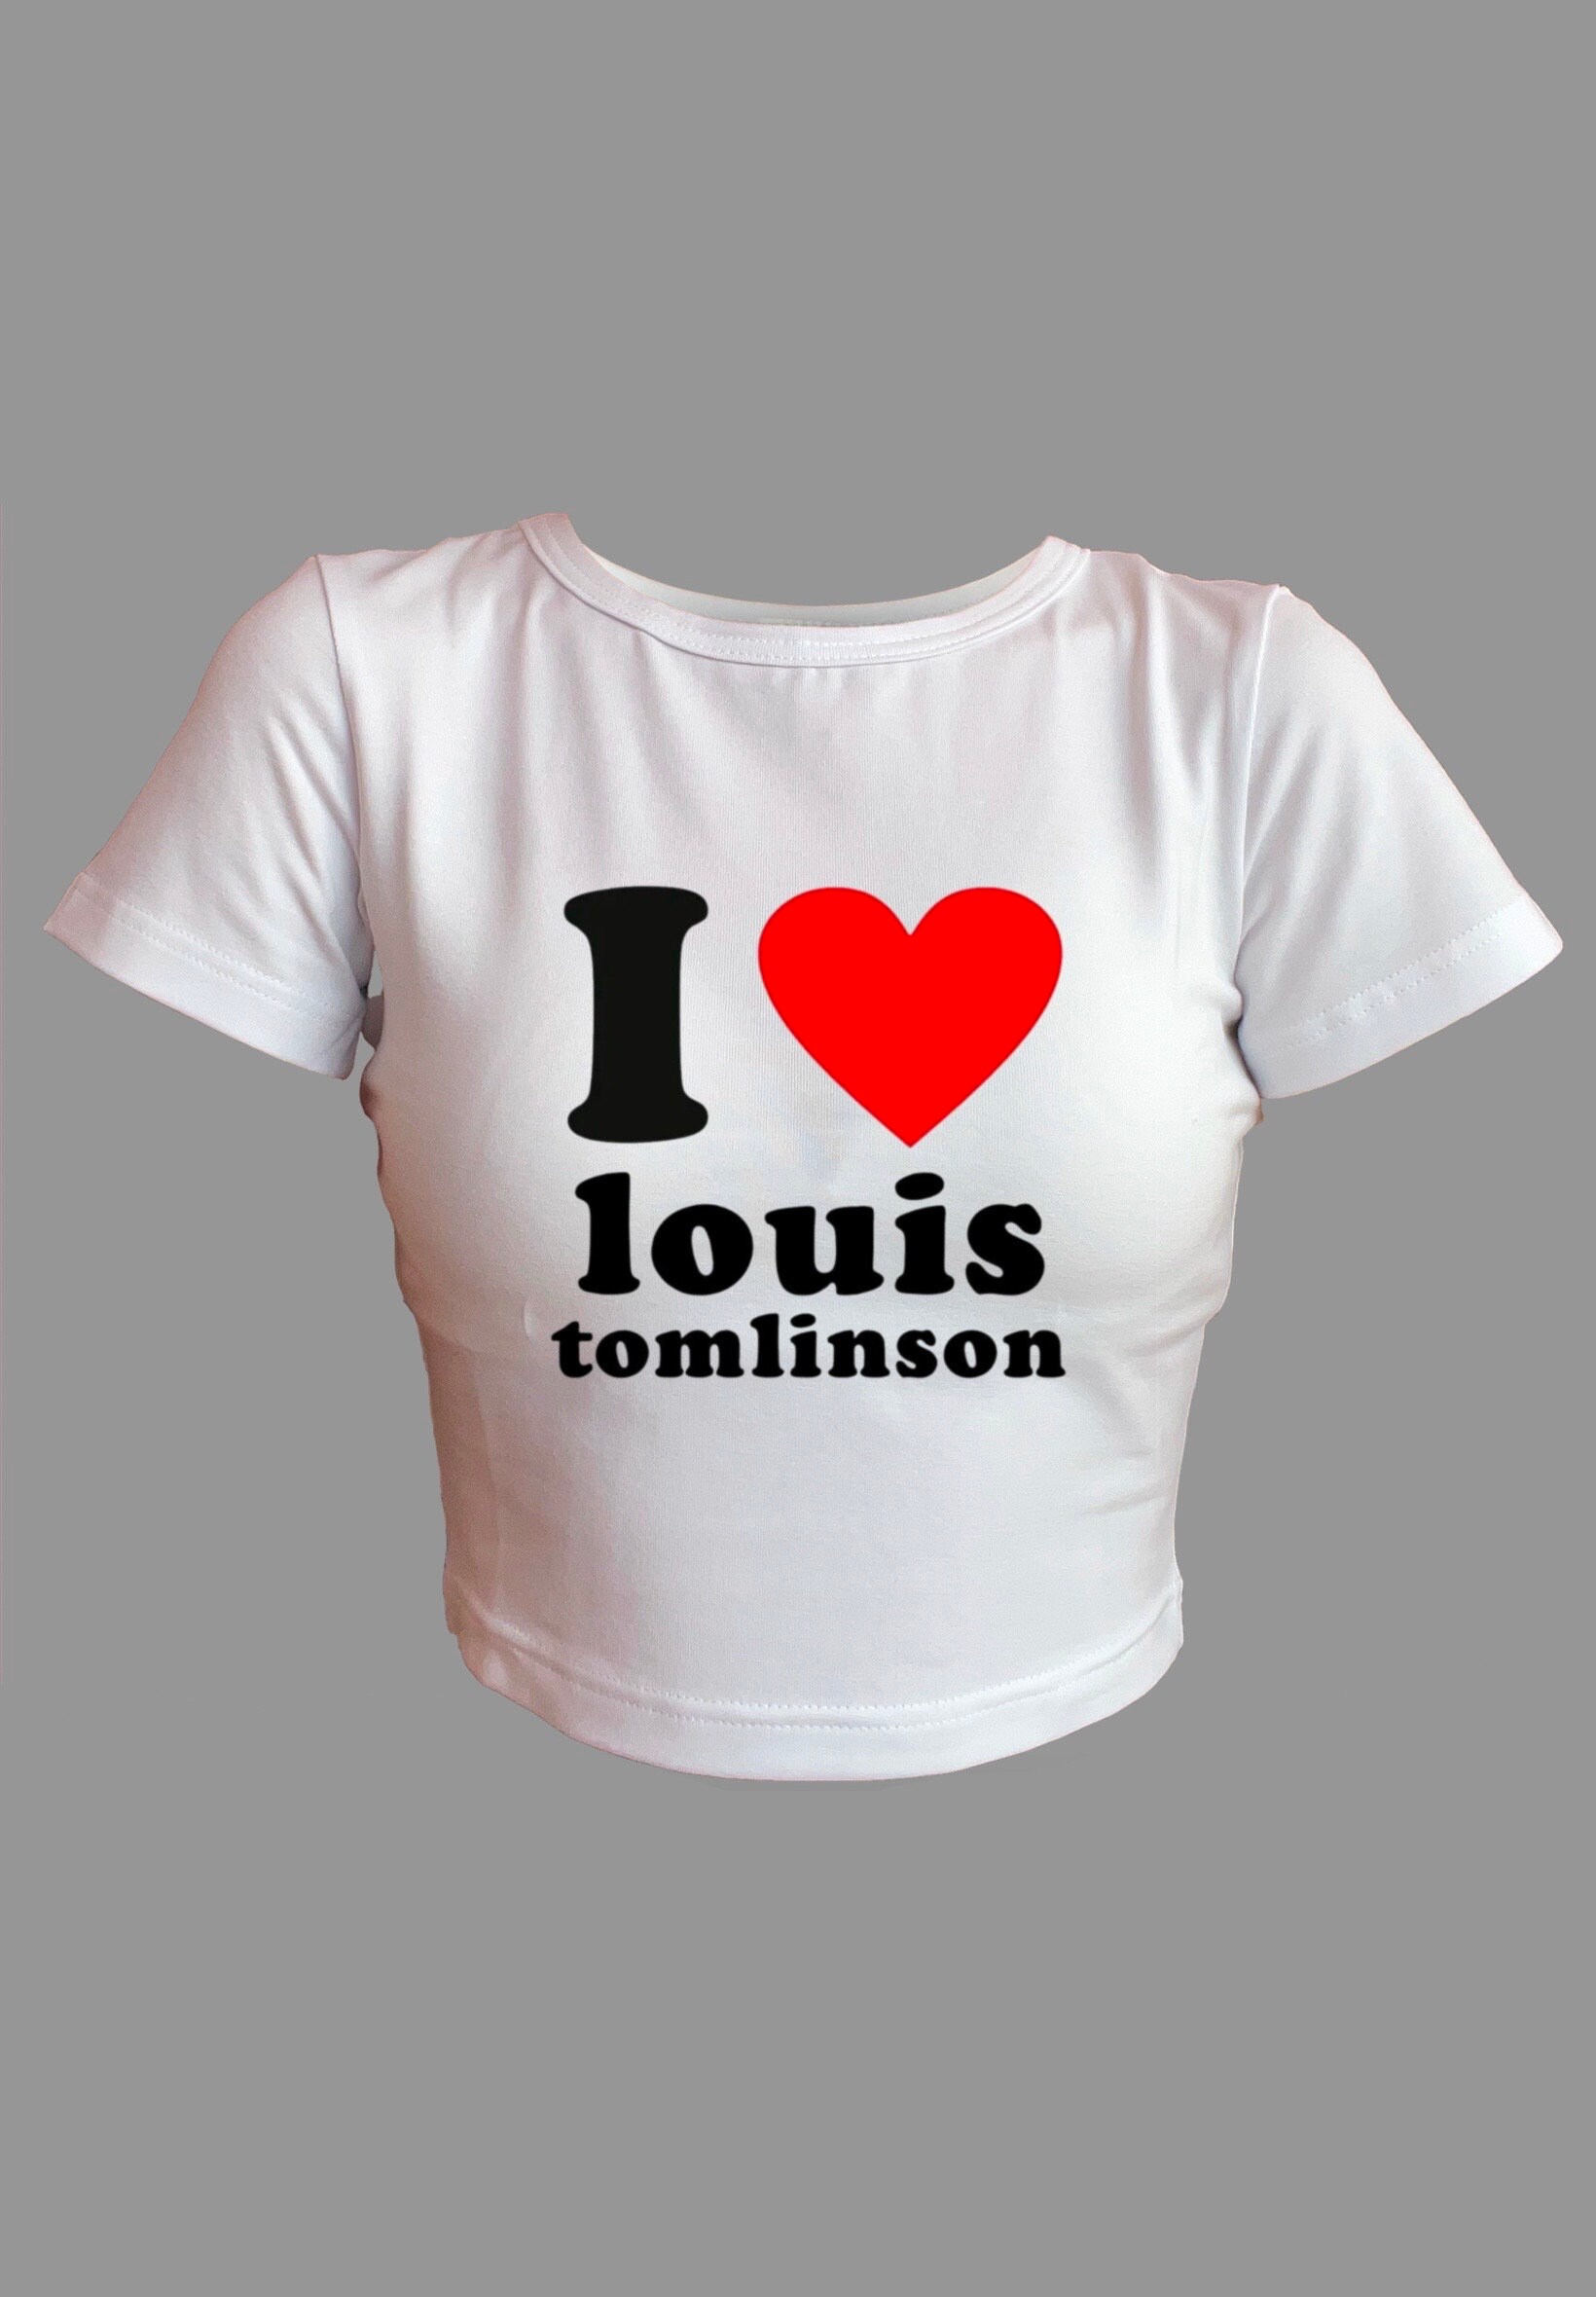 Limited Edition Smiley Summer Merch from Louis Tomlinson has dropped 